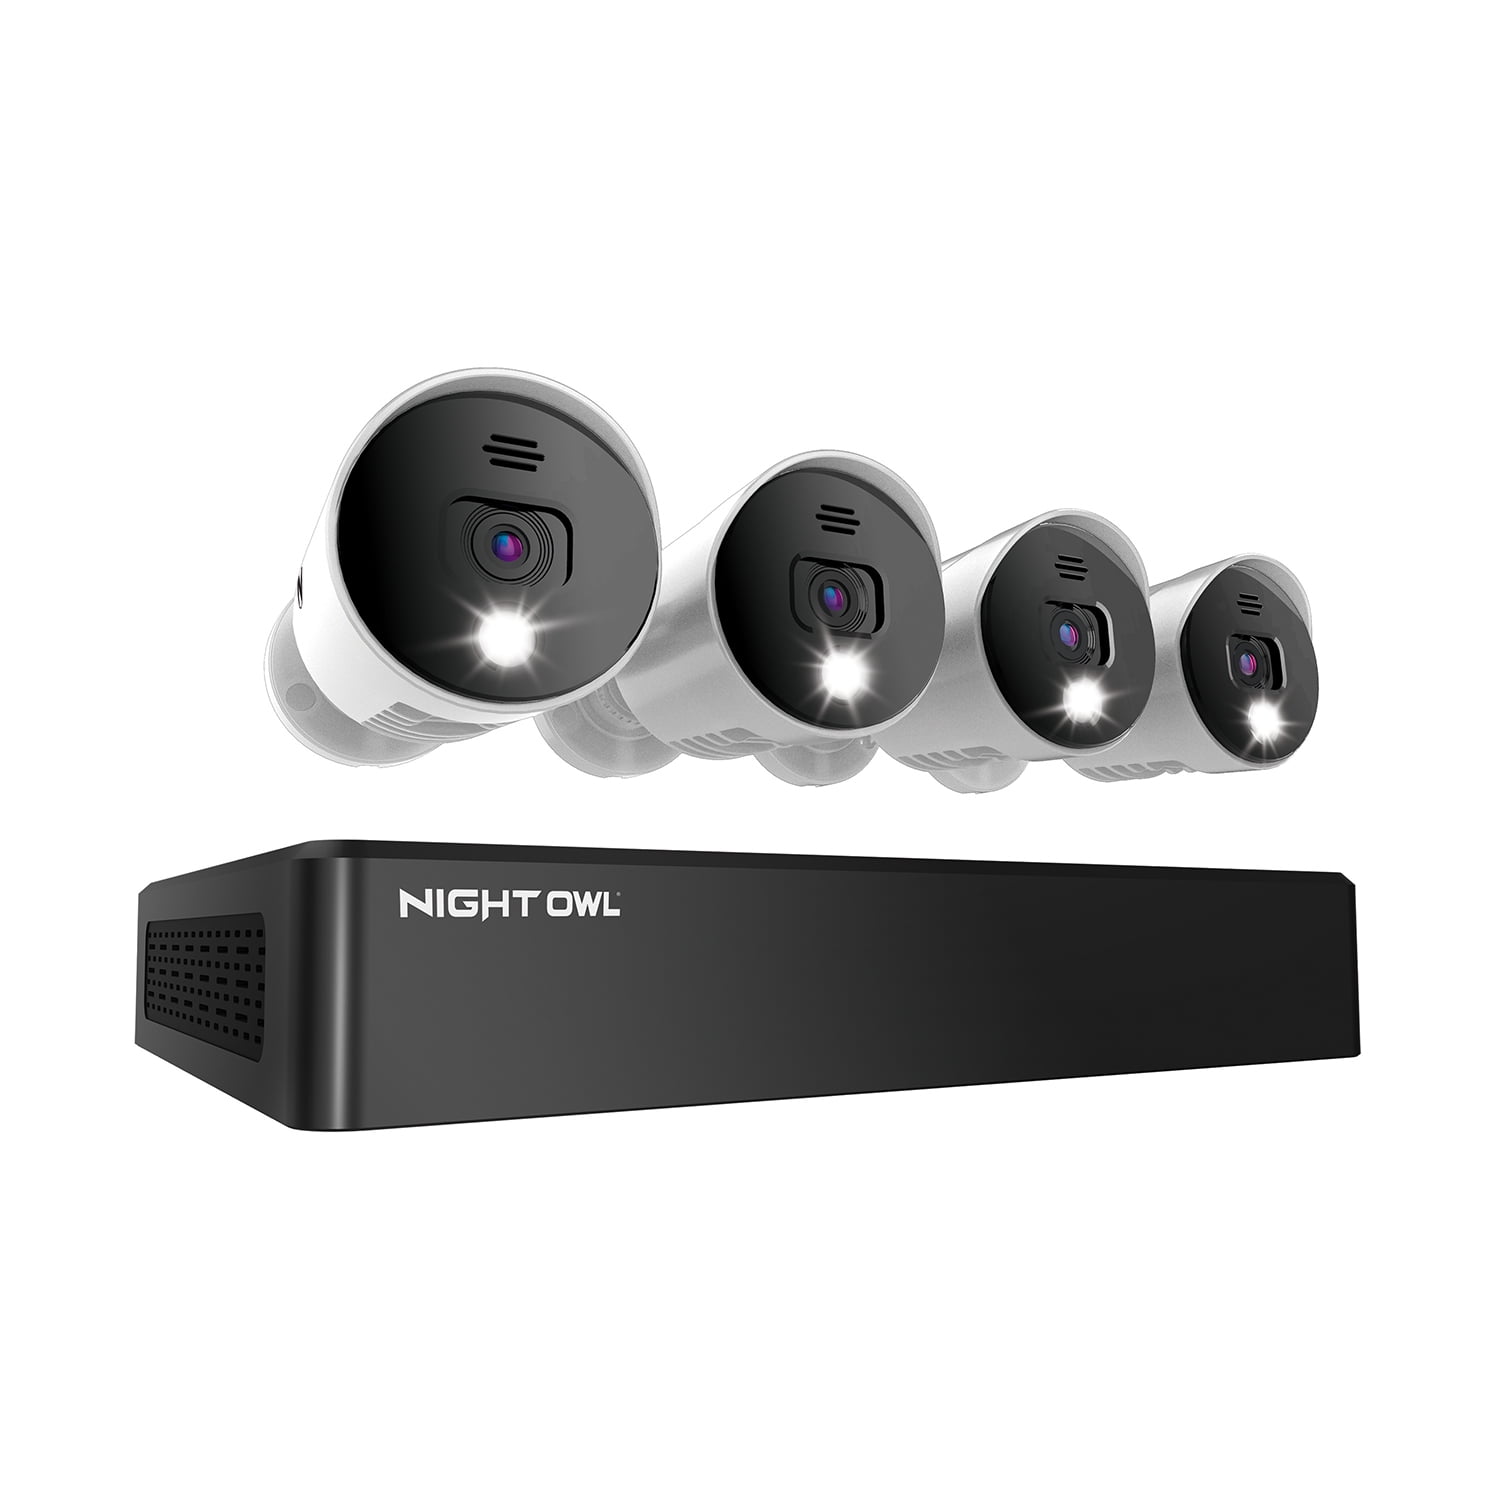 how to setup night owl security cameras 9. Test the cameras to ensure they are functioning properly